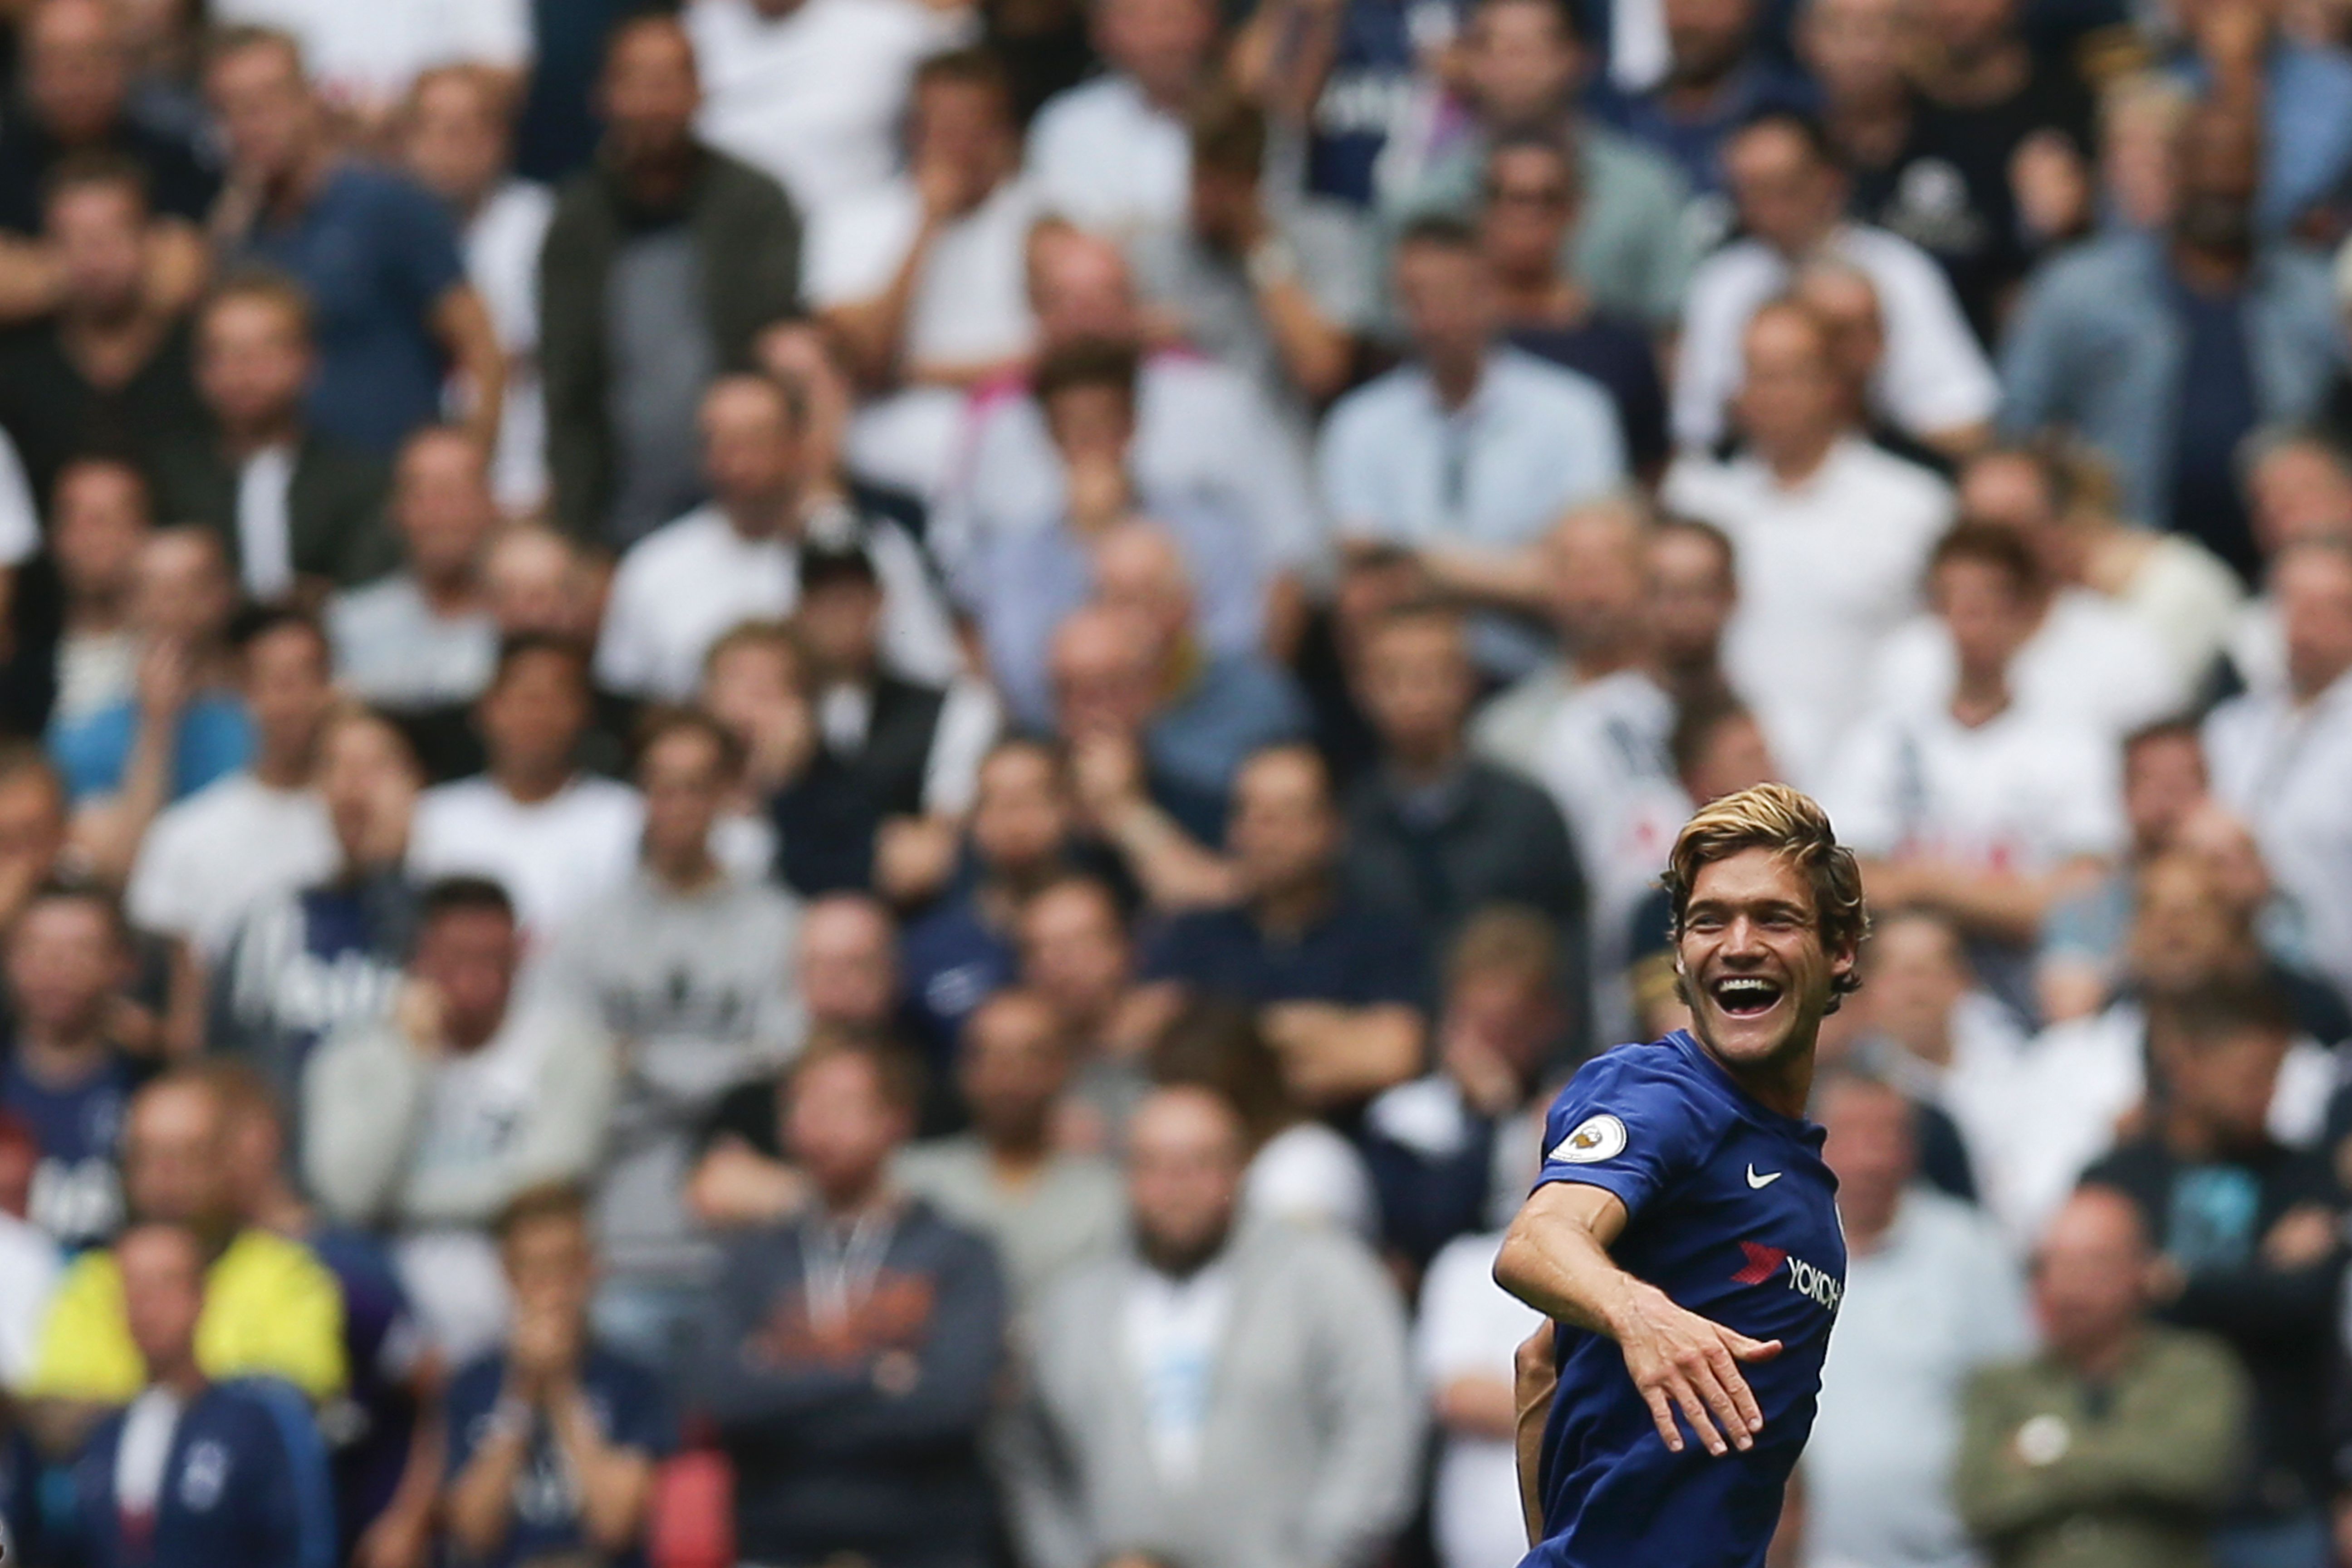 Chelsea's Spanish defender Marcos Alonso celebrates scoring the team's first goal during the English Premier League football match between Tottenham Hotspur and Chelsea at Wembley Stadium in London, on August 20, 2017. / AFP PHOTO / Daniel LEAL-OLIVAS / RESTRICTED TO EDITORIAL USE. No use with unauthorized audio, video, data, fixture lists, club/league logos or 'live' services. Online in-match use limited to 45 images, no video emulation. No use in betting, games or single club/league/player publications.        (Photo credit should read DANIEL LEAL-OLIVAS/AFP/Getty Images)